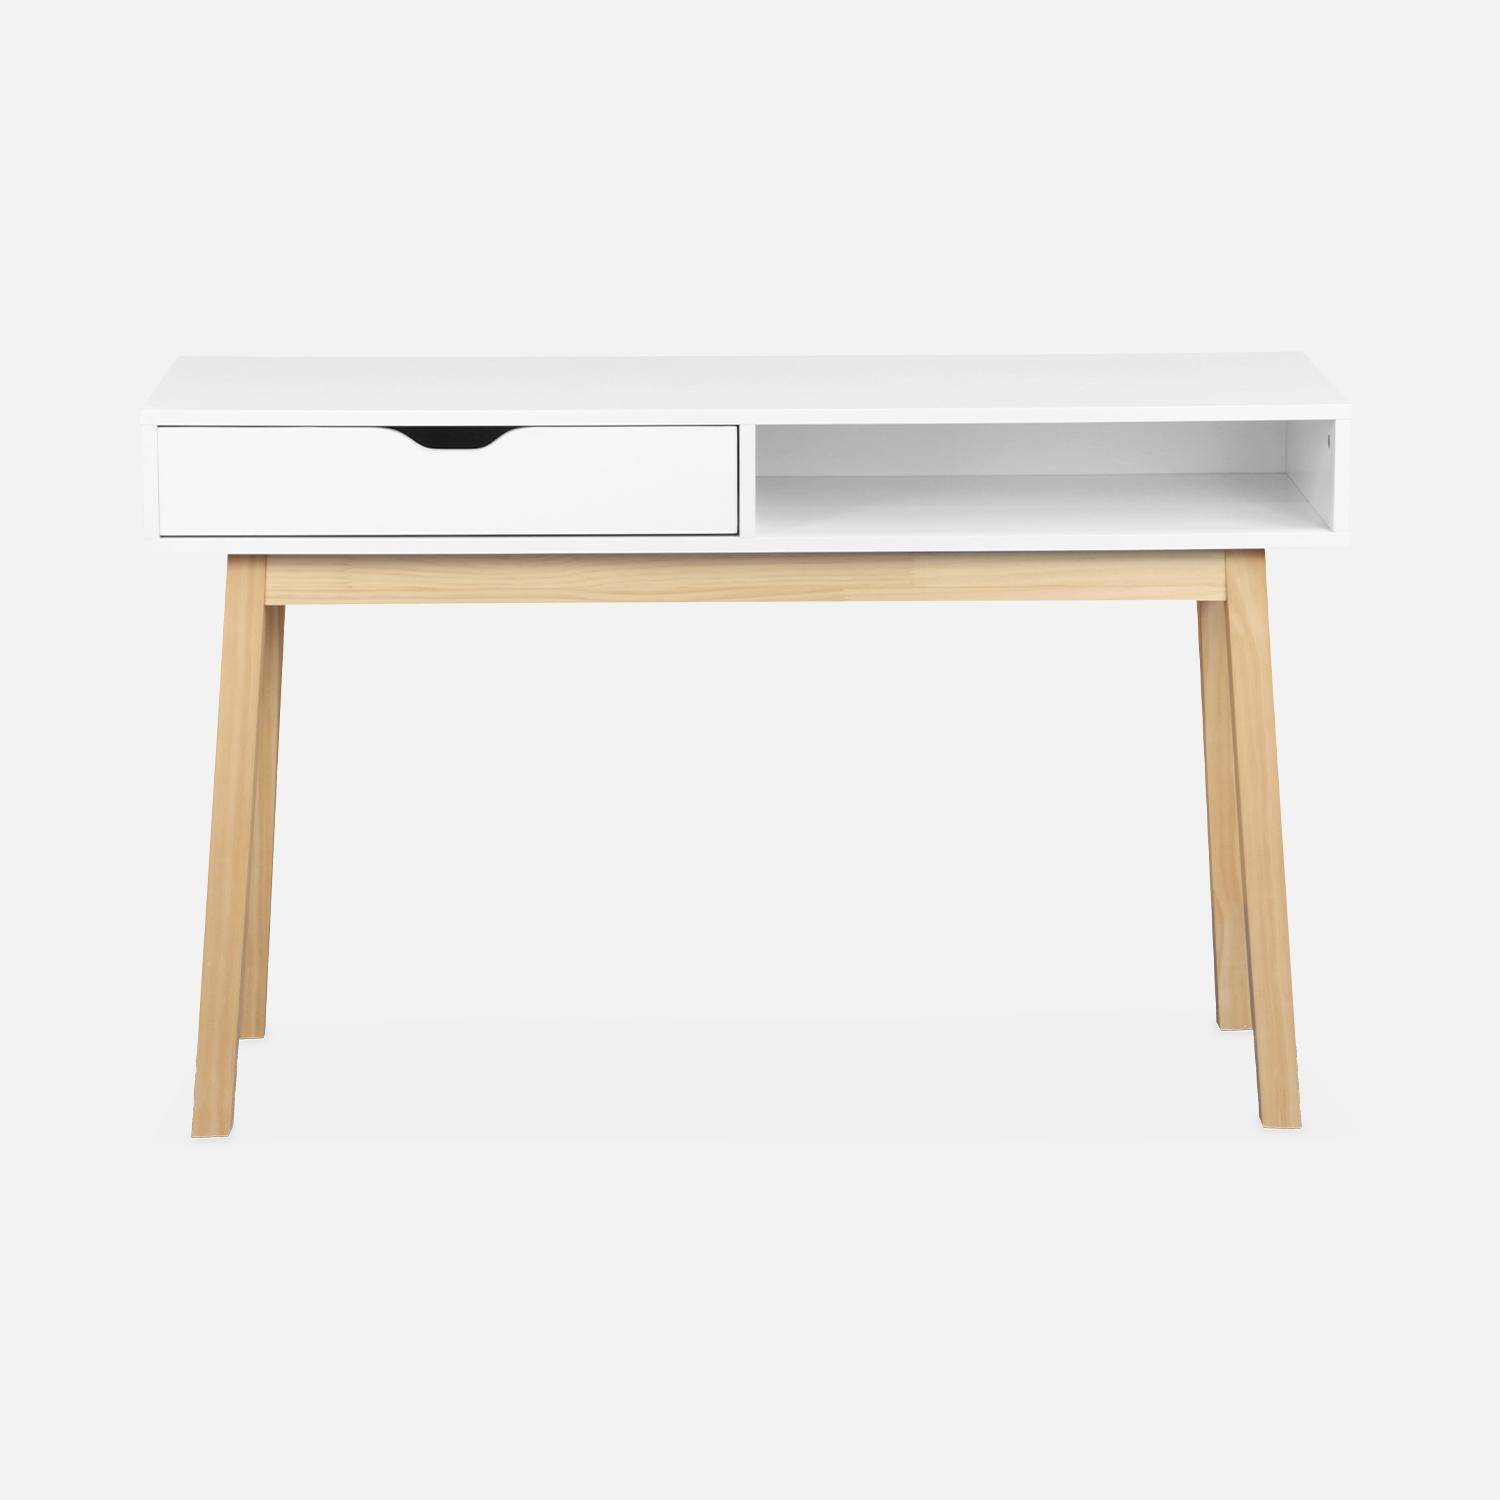 L119cm x W37cm x H74.5cm, Console with Wood Effect and Wooden Legs, 1 Drawer, white,  Photo4